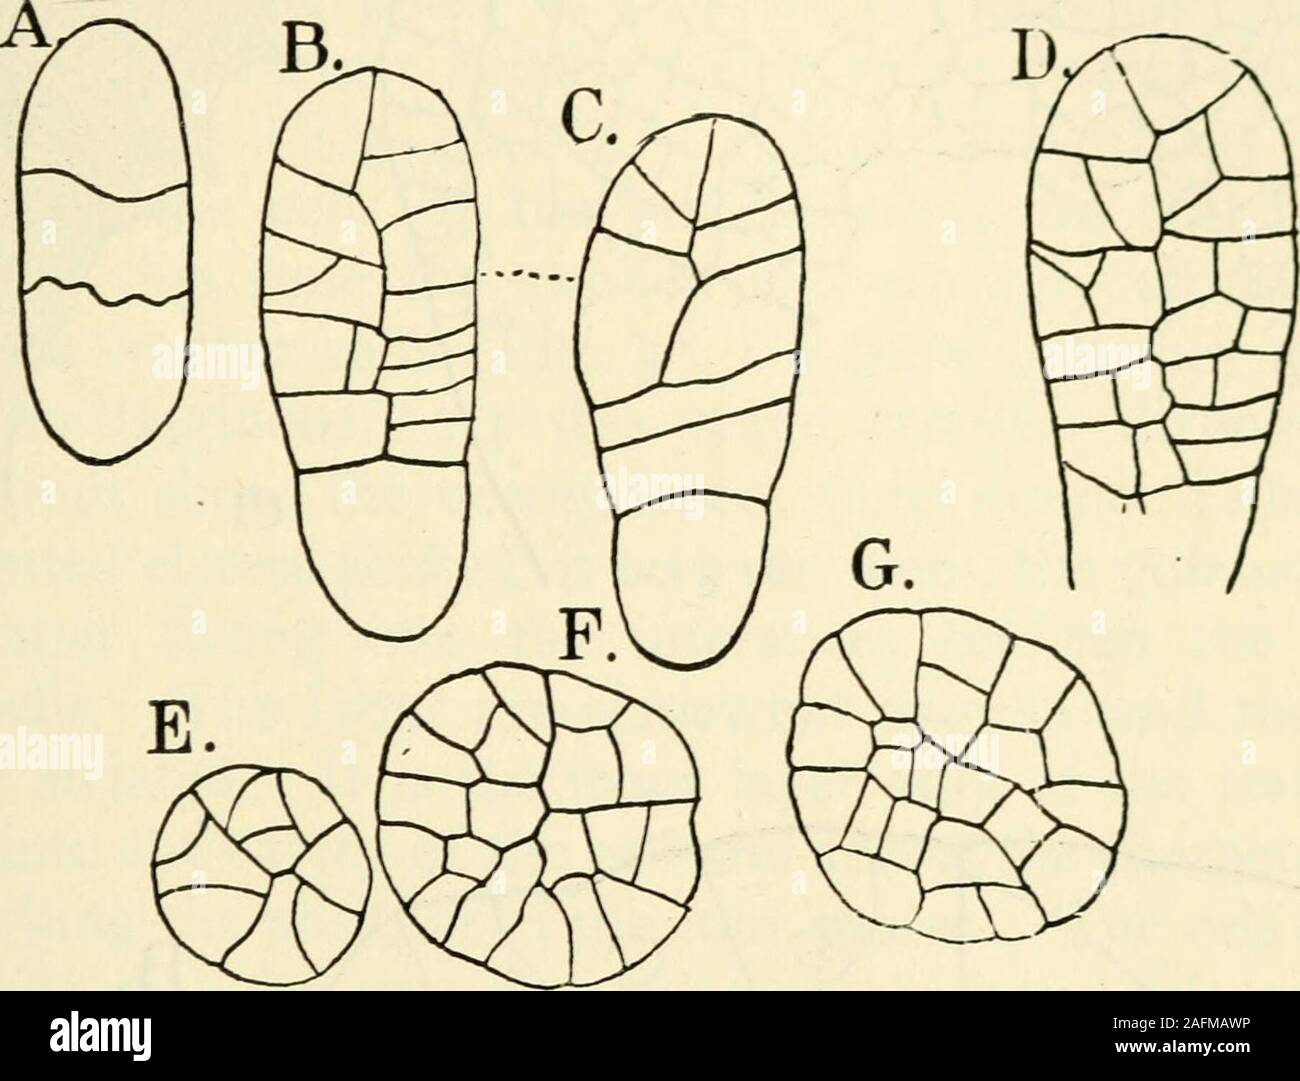 . The structure and development of mosses and ferns (Archegoniatae). mber of neckcanal cells in the full-grown archegonium is normally eight.The archegonium (Fig. 54, F), at maturity is nearly cylin-drical, with the venter but little enlarged. The canal cells arebroad, but the egg small. The venter has a two-layered wall.The first-formed archegonia arise in strictly acropetal sue- Ill THE JUNGERMANNIALES log cession, and finally the apical cell divides by a transverse wall,and the outer cell so formed becomes transformed into anarchegonium. In a number of cases observed, young arche-gonia were Stock Photo